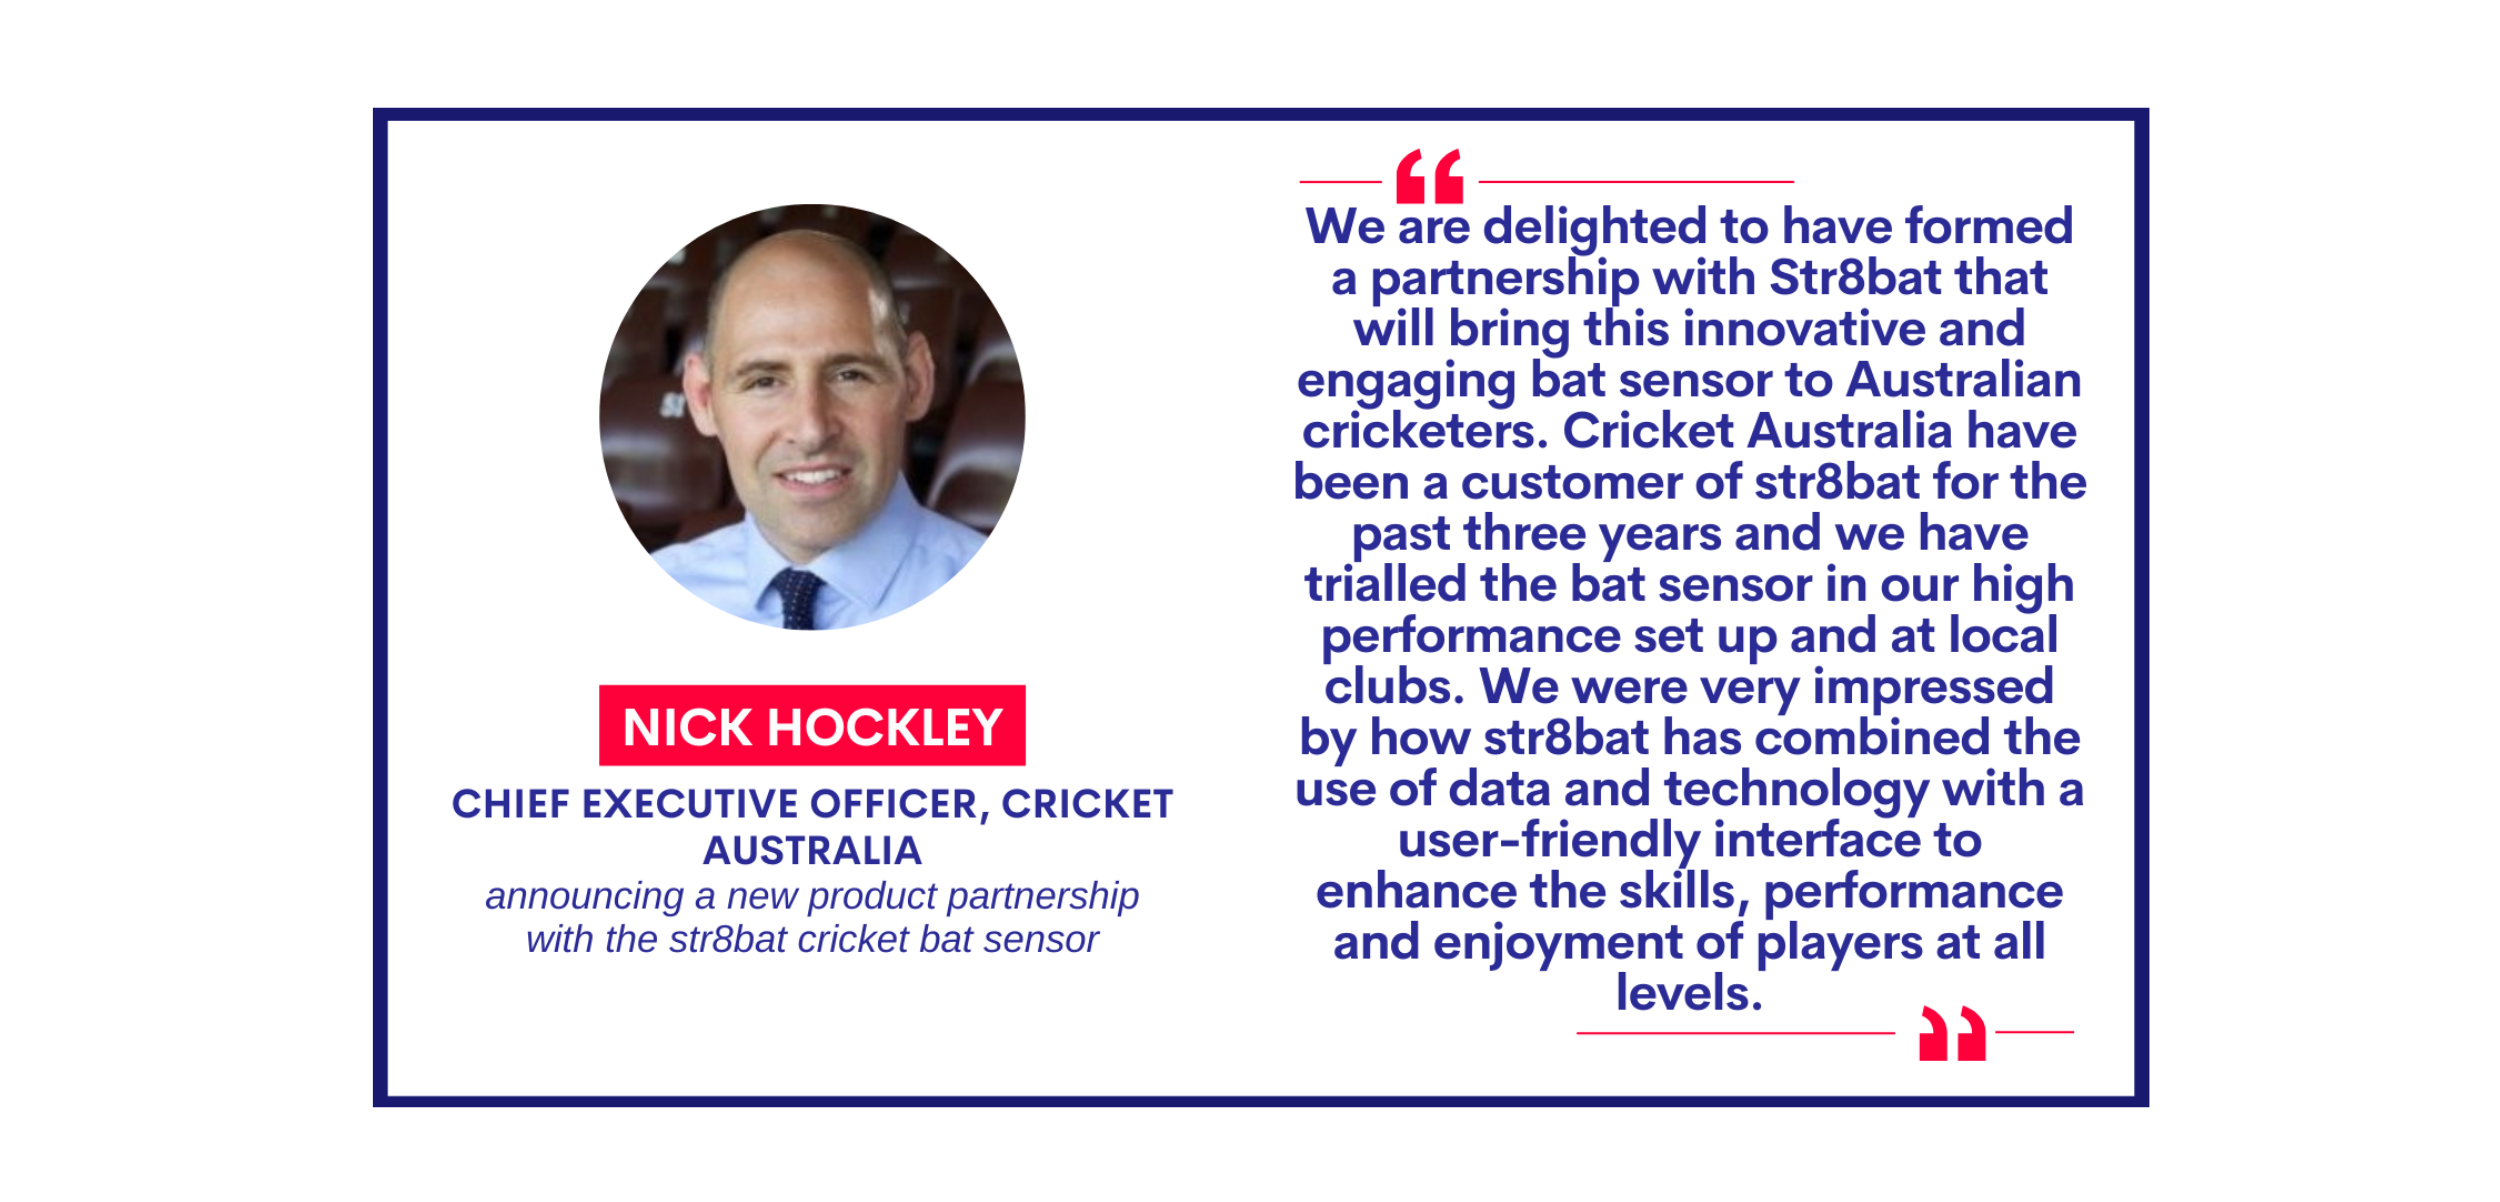 Nick Hockley, Chief Executive Officer, Cricket Australia on September 29, 2022